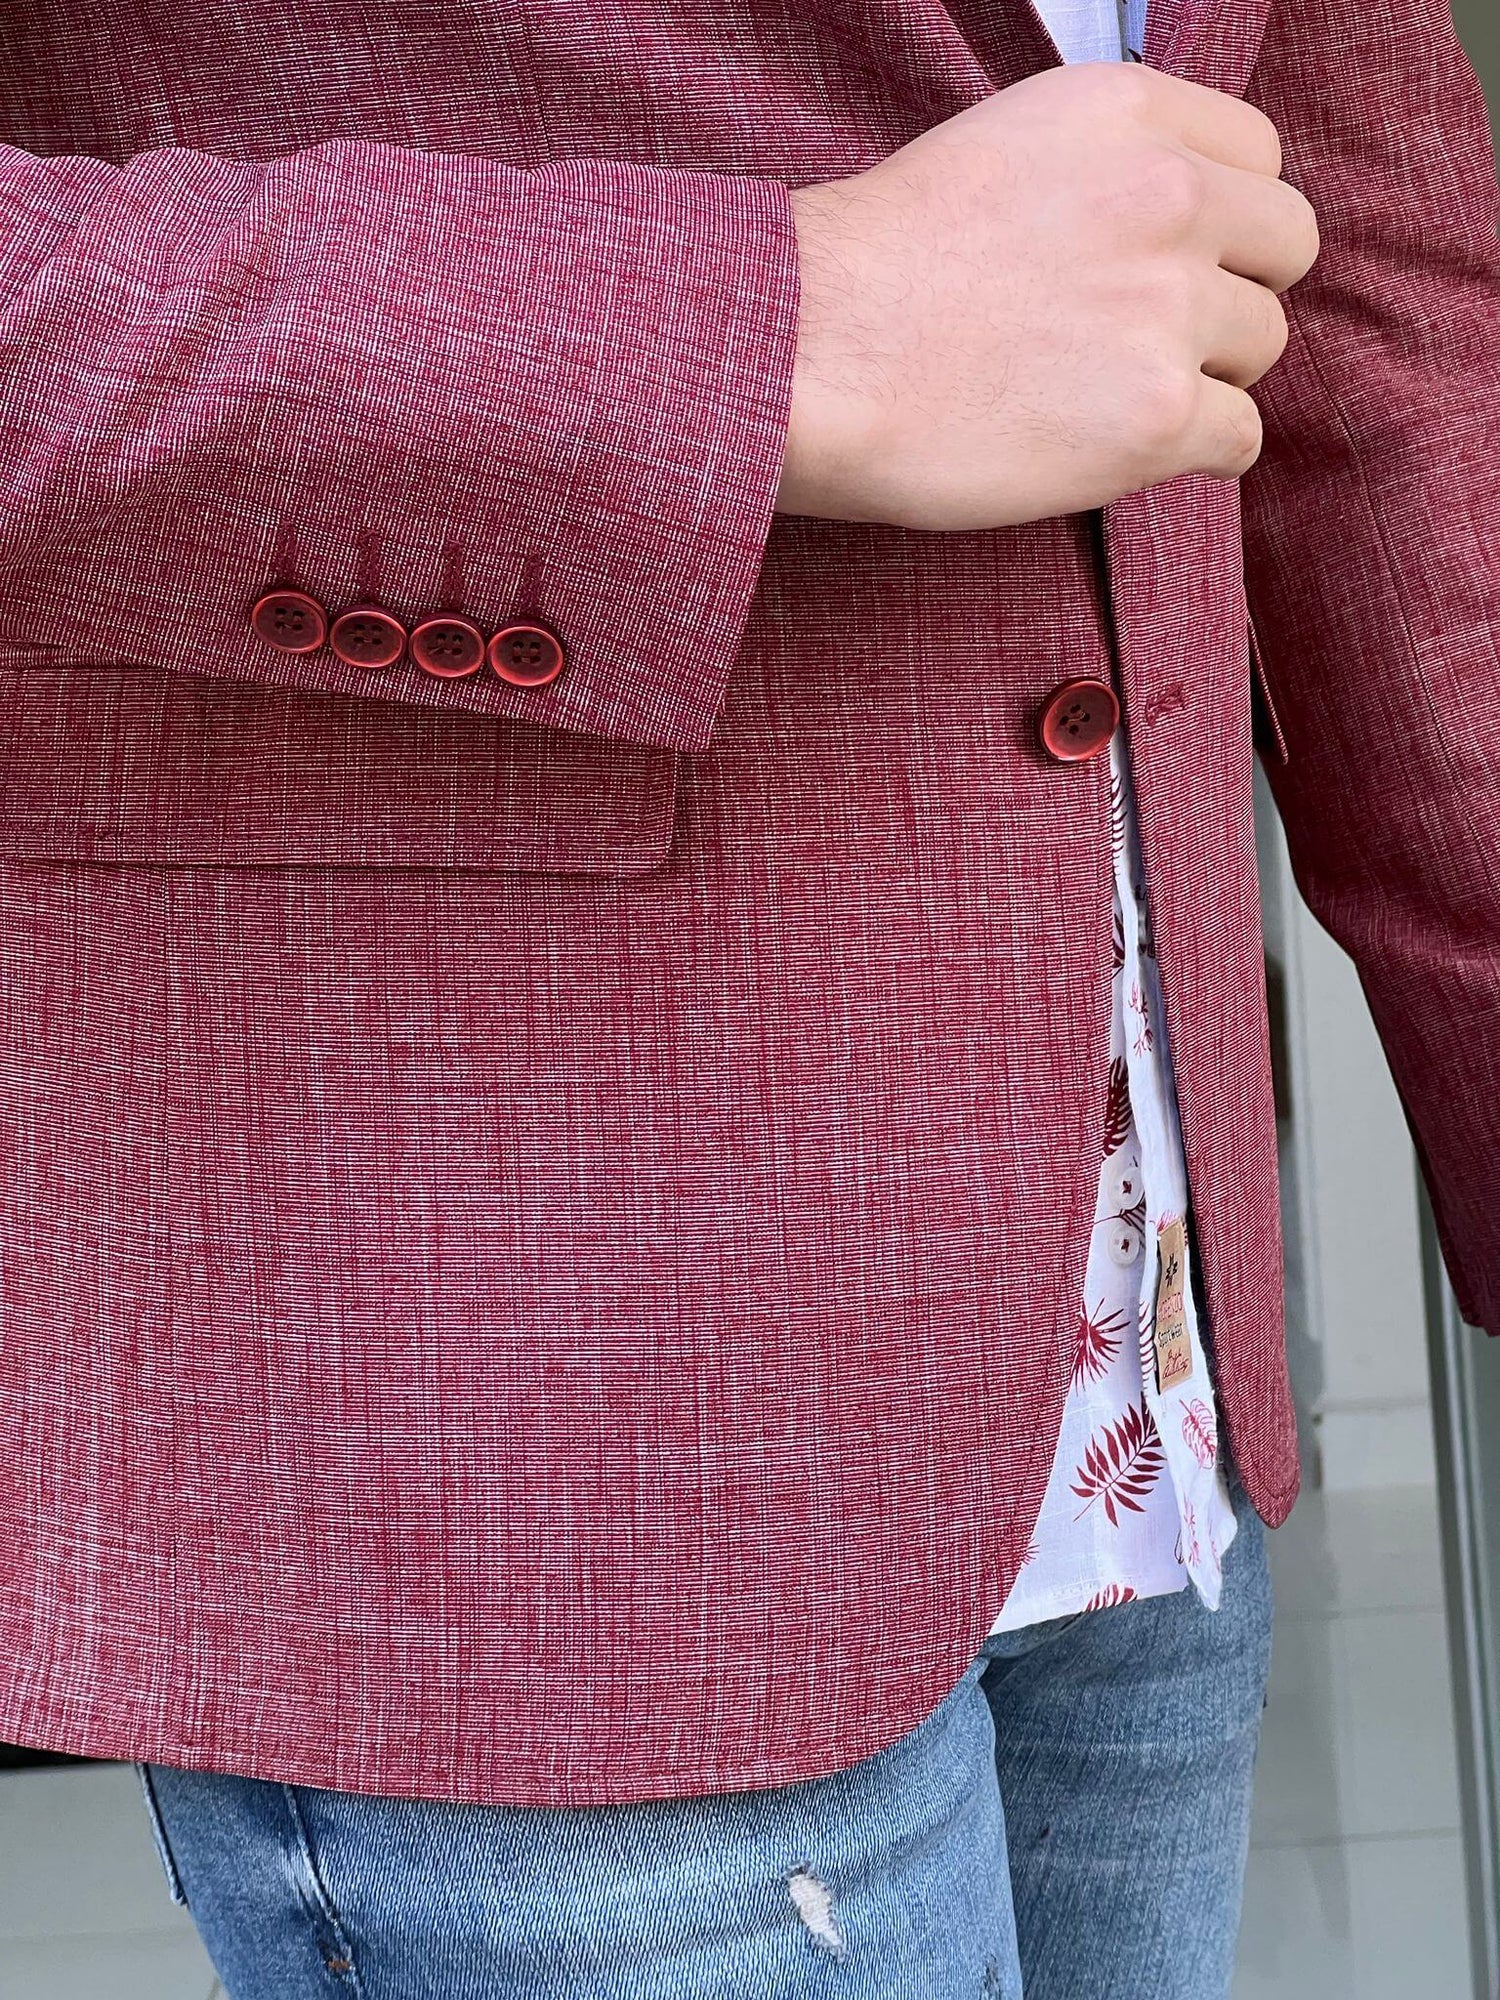 Perfectly tailored Kansas Red Cotton Blazer for any occasion